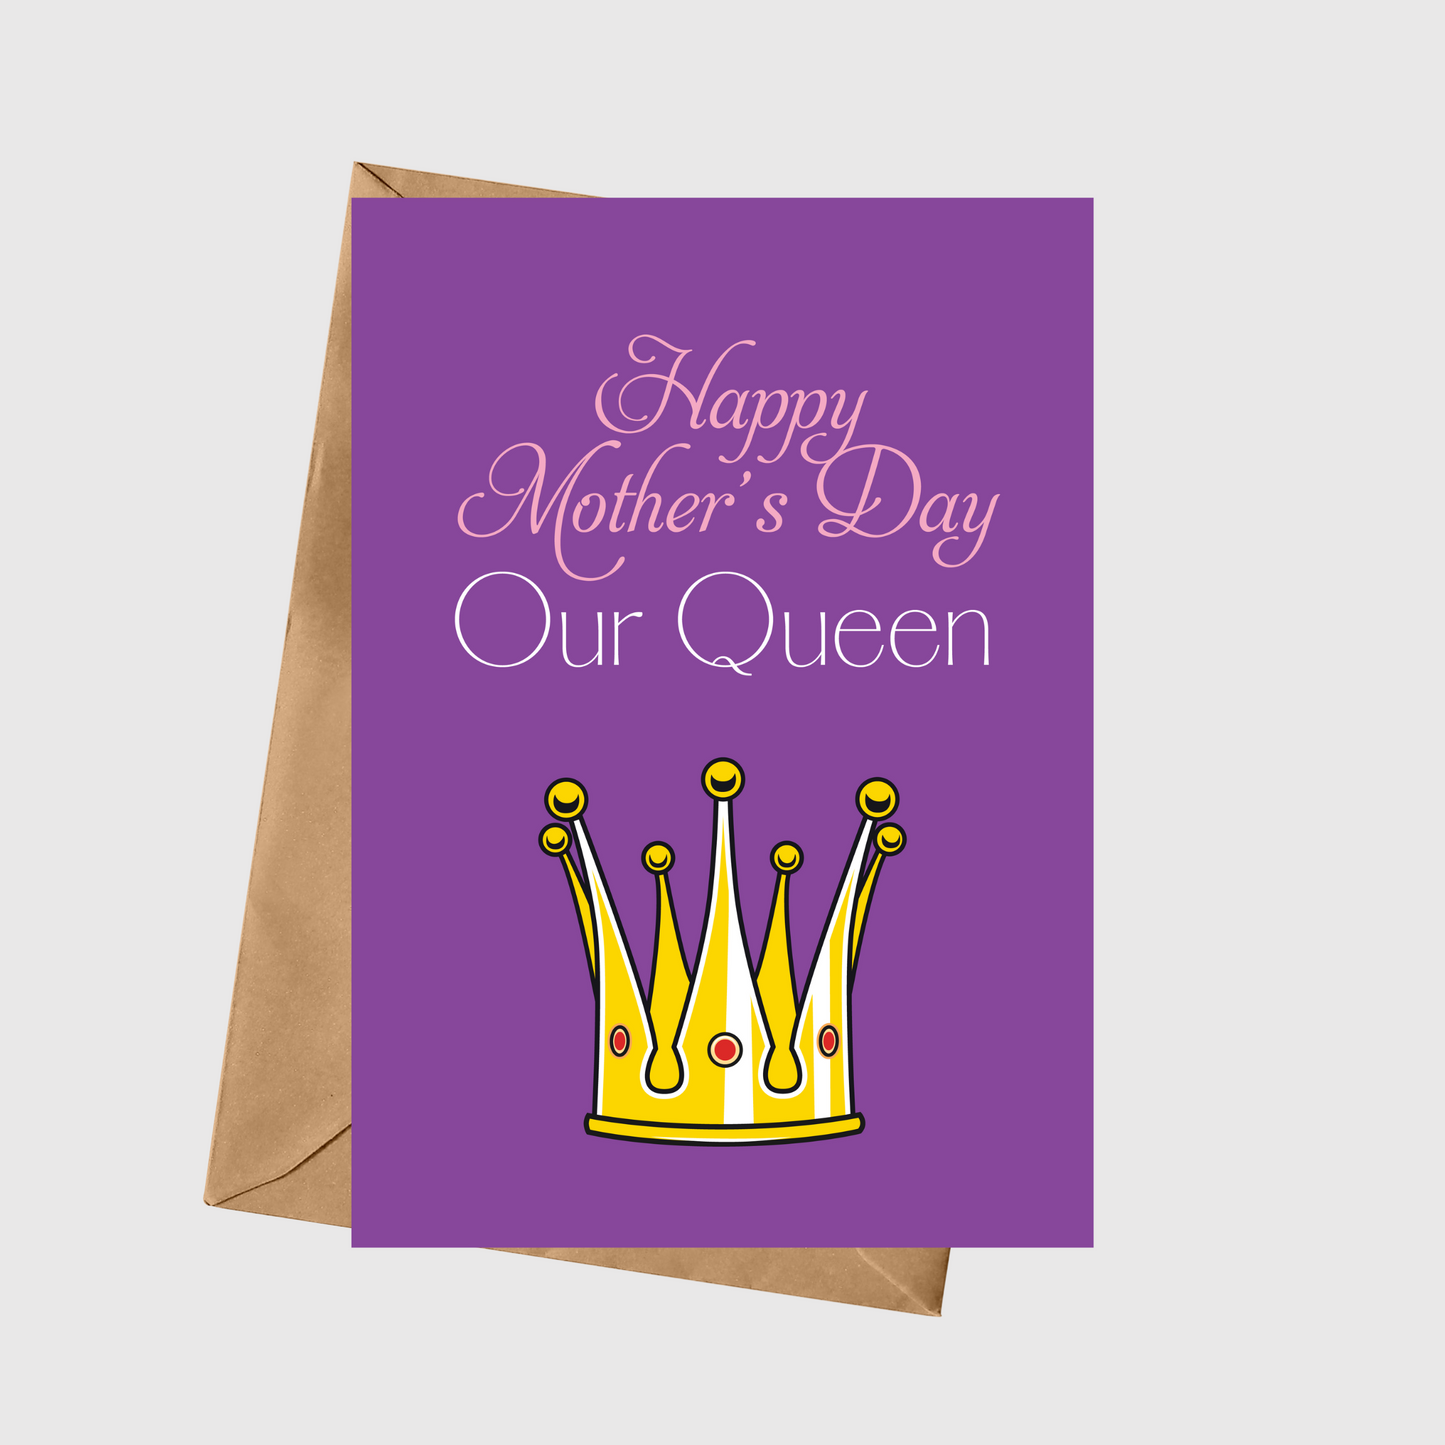 Happy Mother's Day - Our Queen